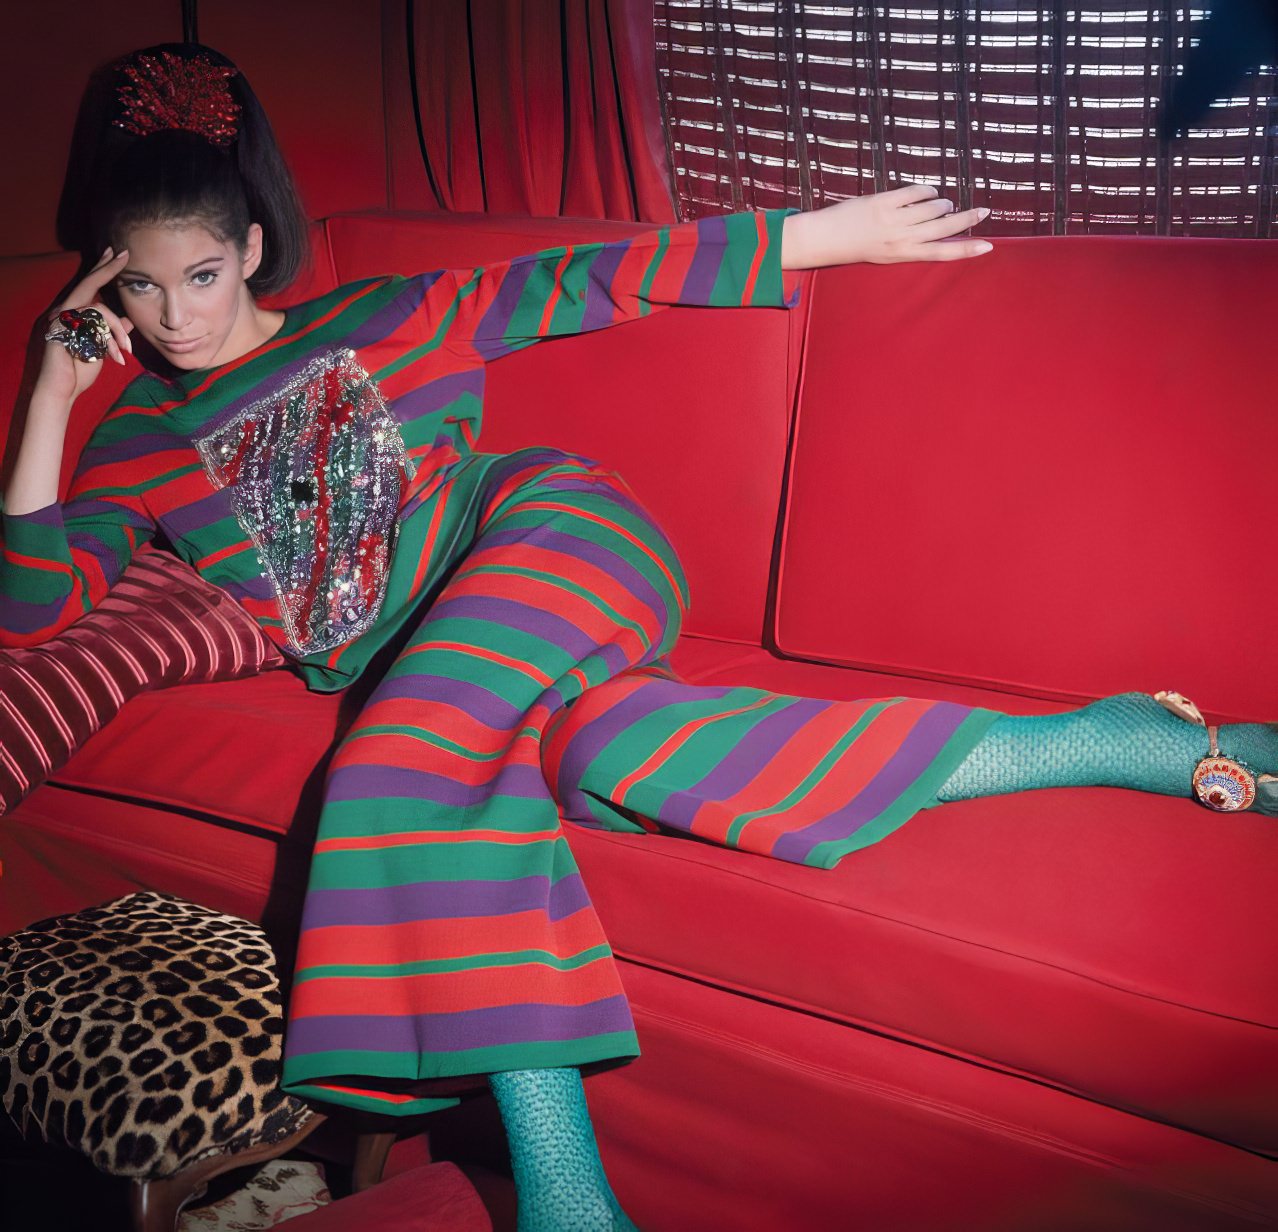 Ann Turkel wearing striped dinner pajamas by Galanos on a red couch, 1966.